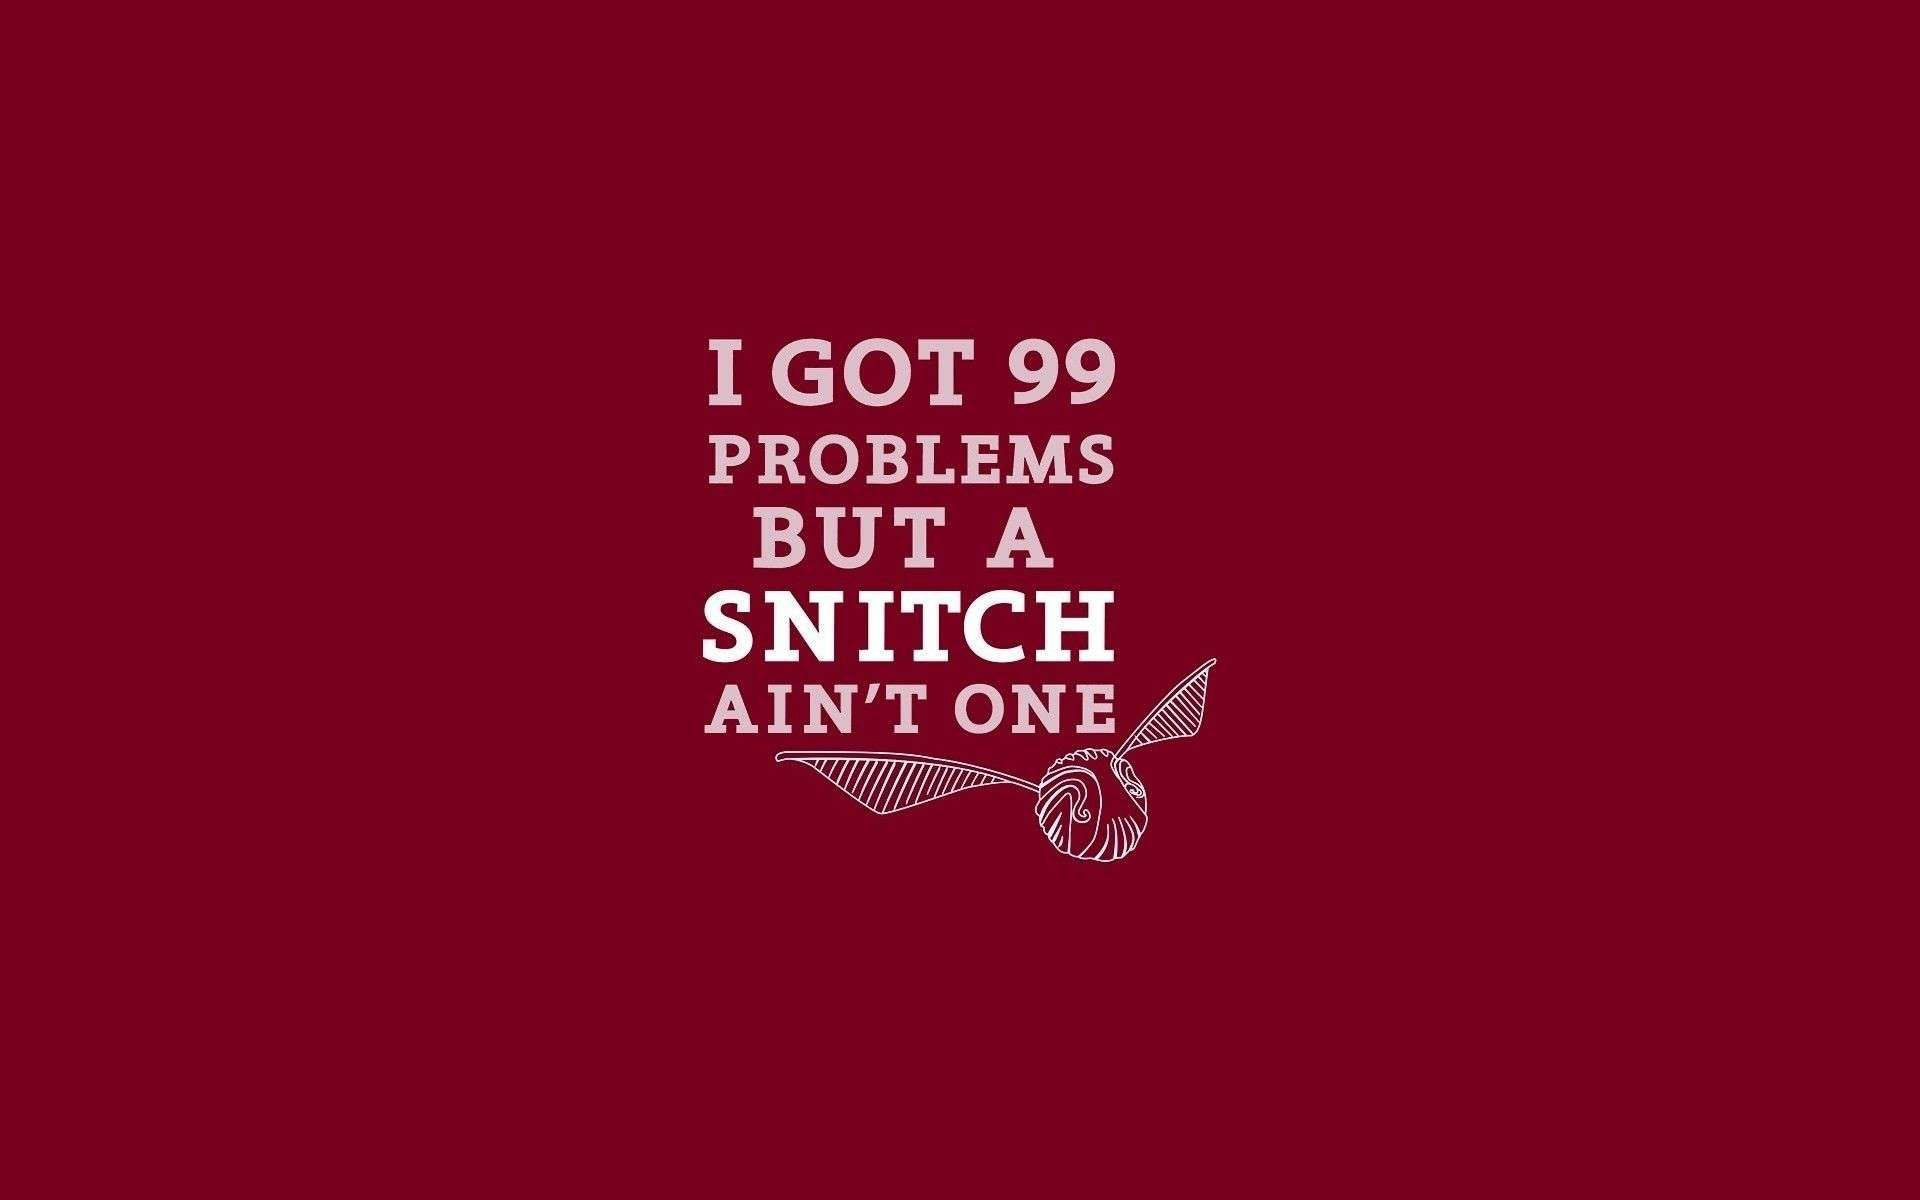 Cute Harry Potter Snitch Art Problems Background